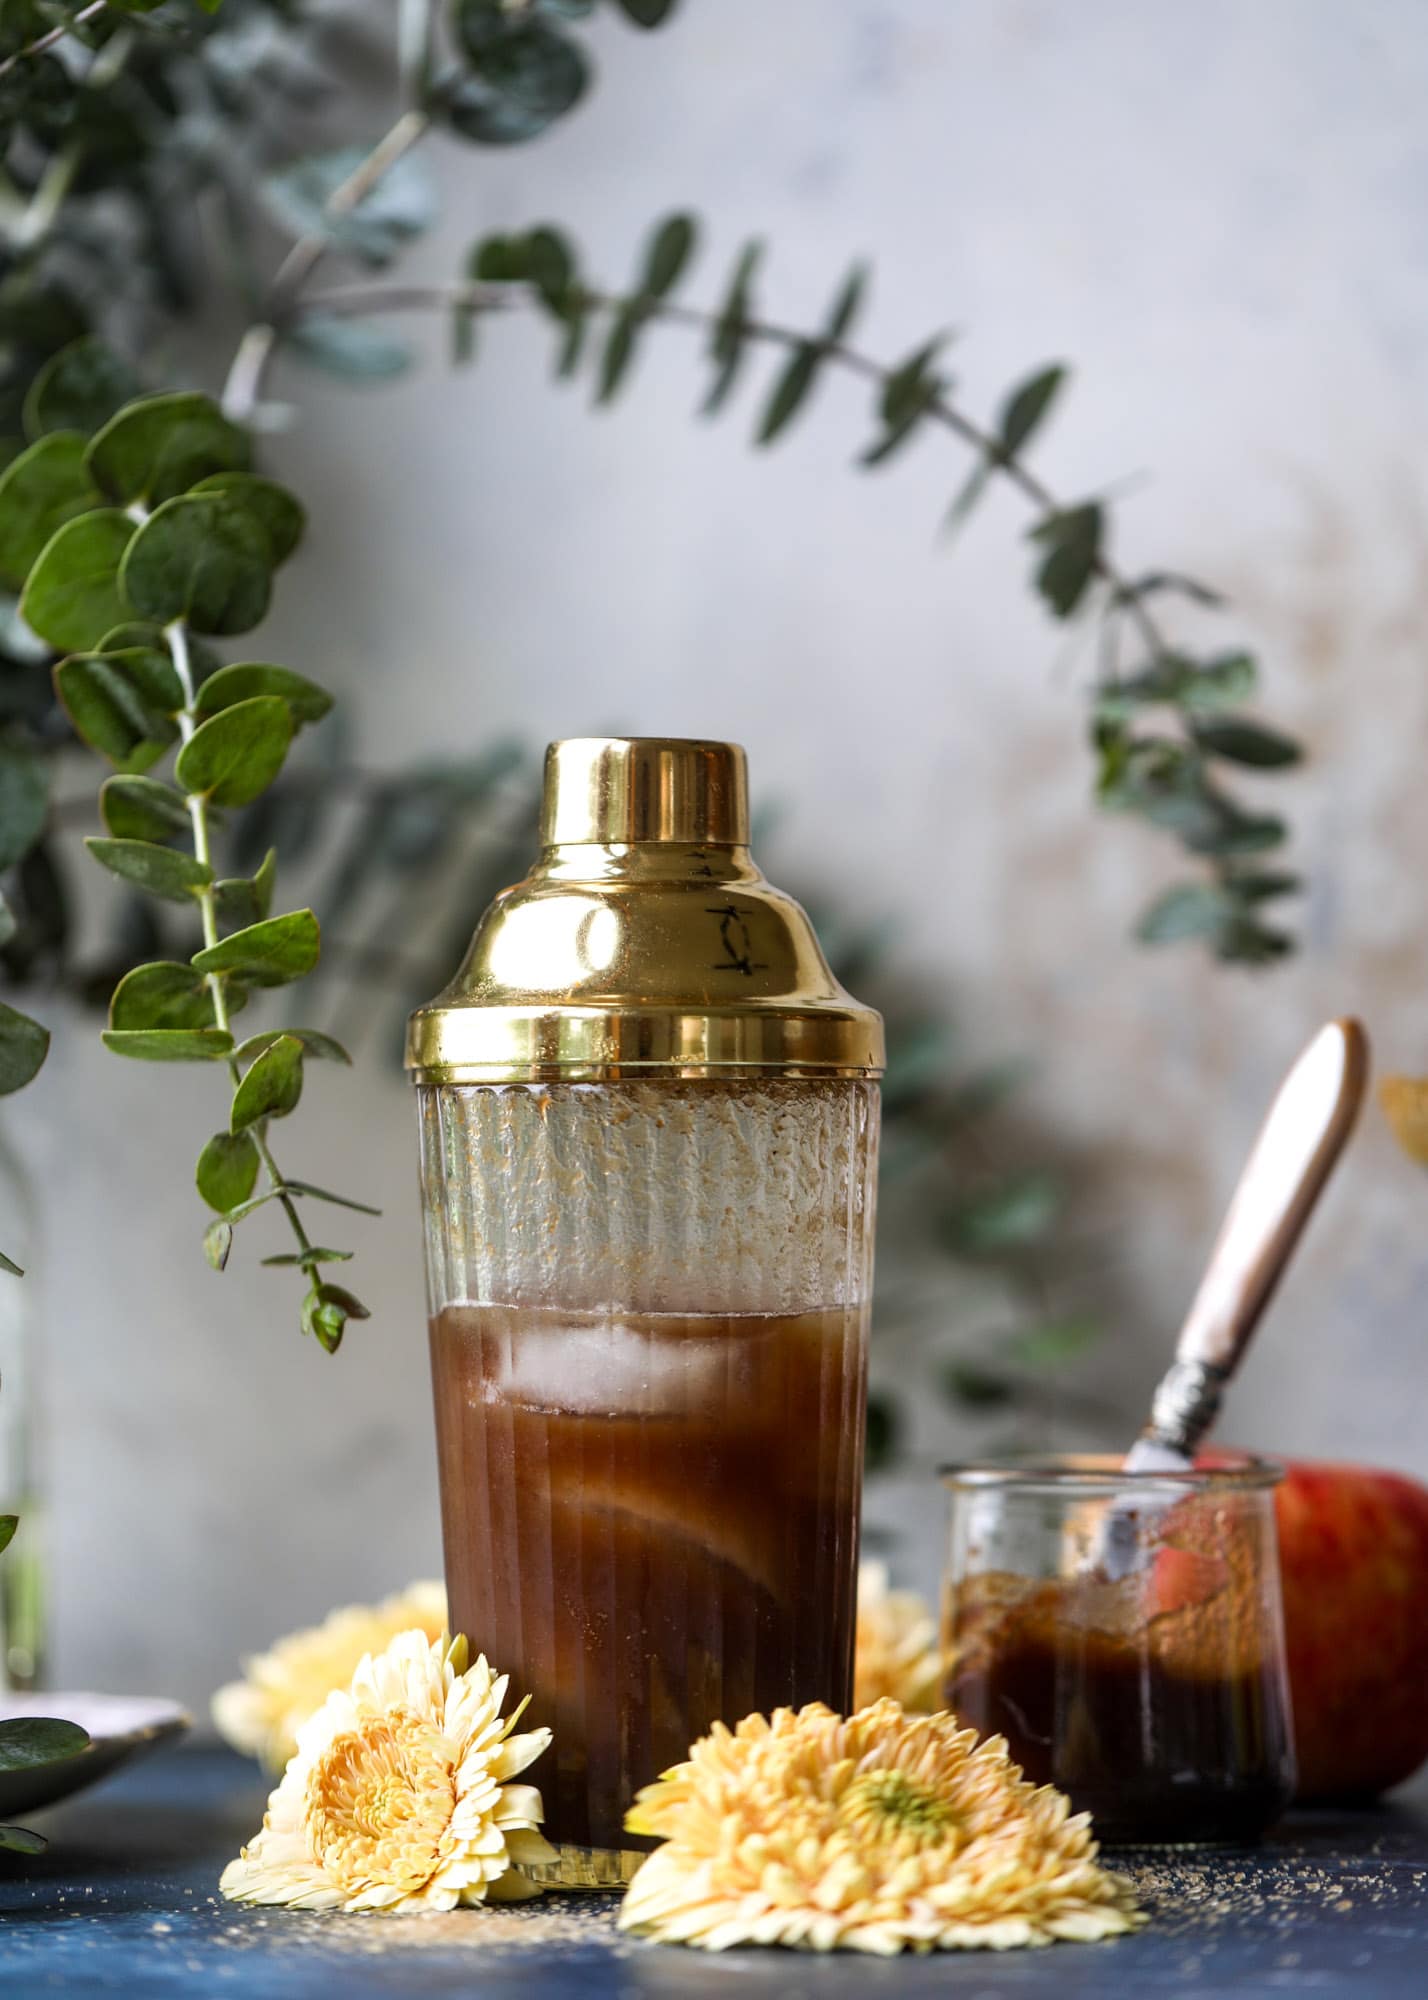 This apple butter cocktail is perfect for the fall season and incredible delicious! It's super simple too: you need apple butter, bourbon and ginger ale or ginger beer. A cinnamon sugar rim and a fig garnish make it super pretty. YUM. I howsweeteats.com #apple #butter #cocktail #bourbon #fizz